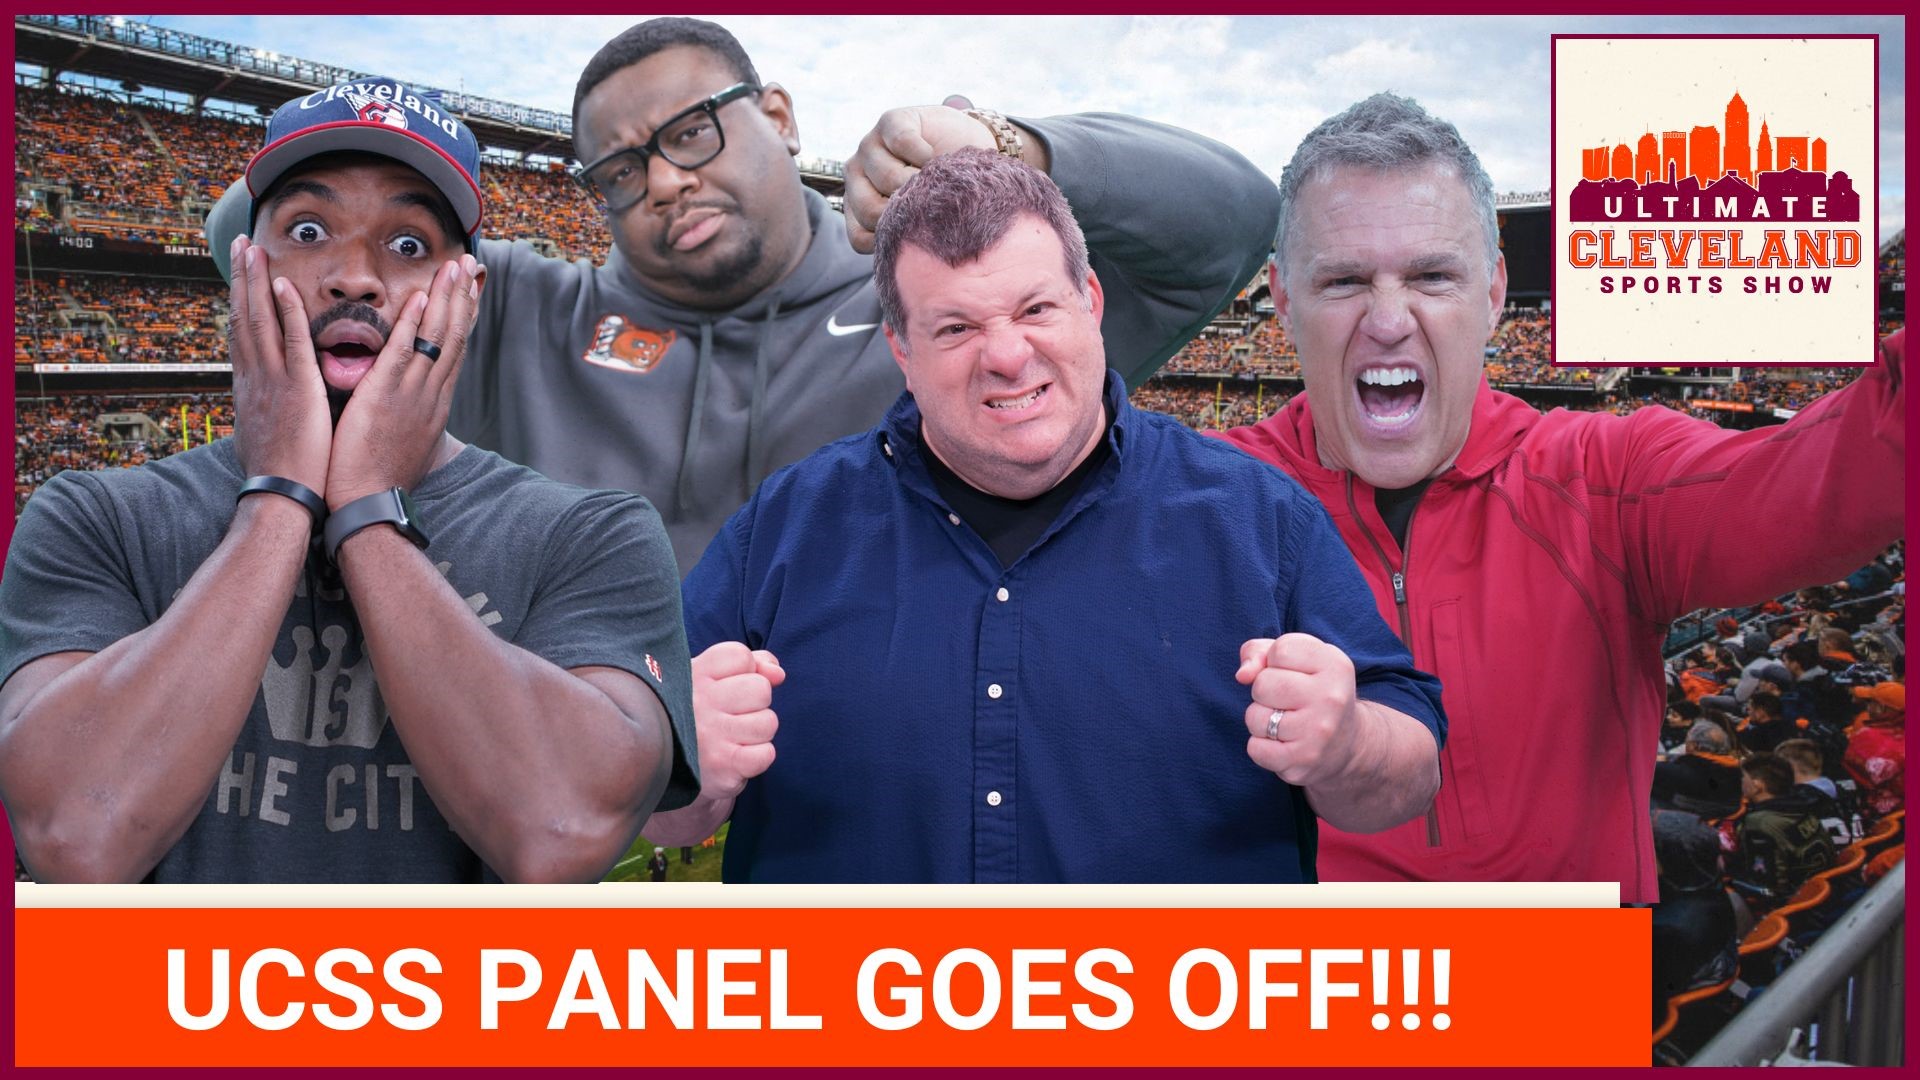 The UCSS panel gets the frustration off their chest about the Browns tough loss & Nick Chubb's injury